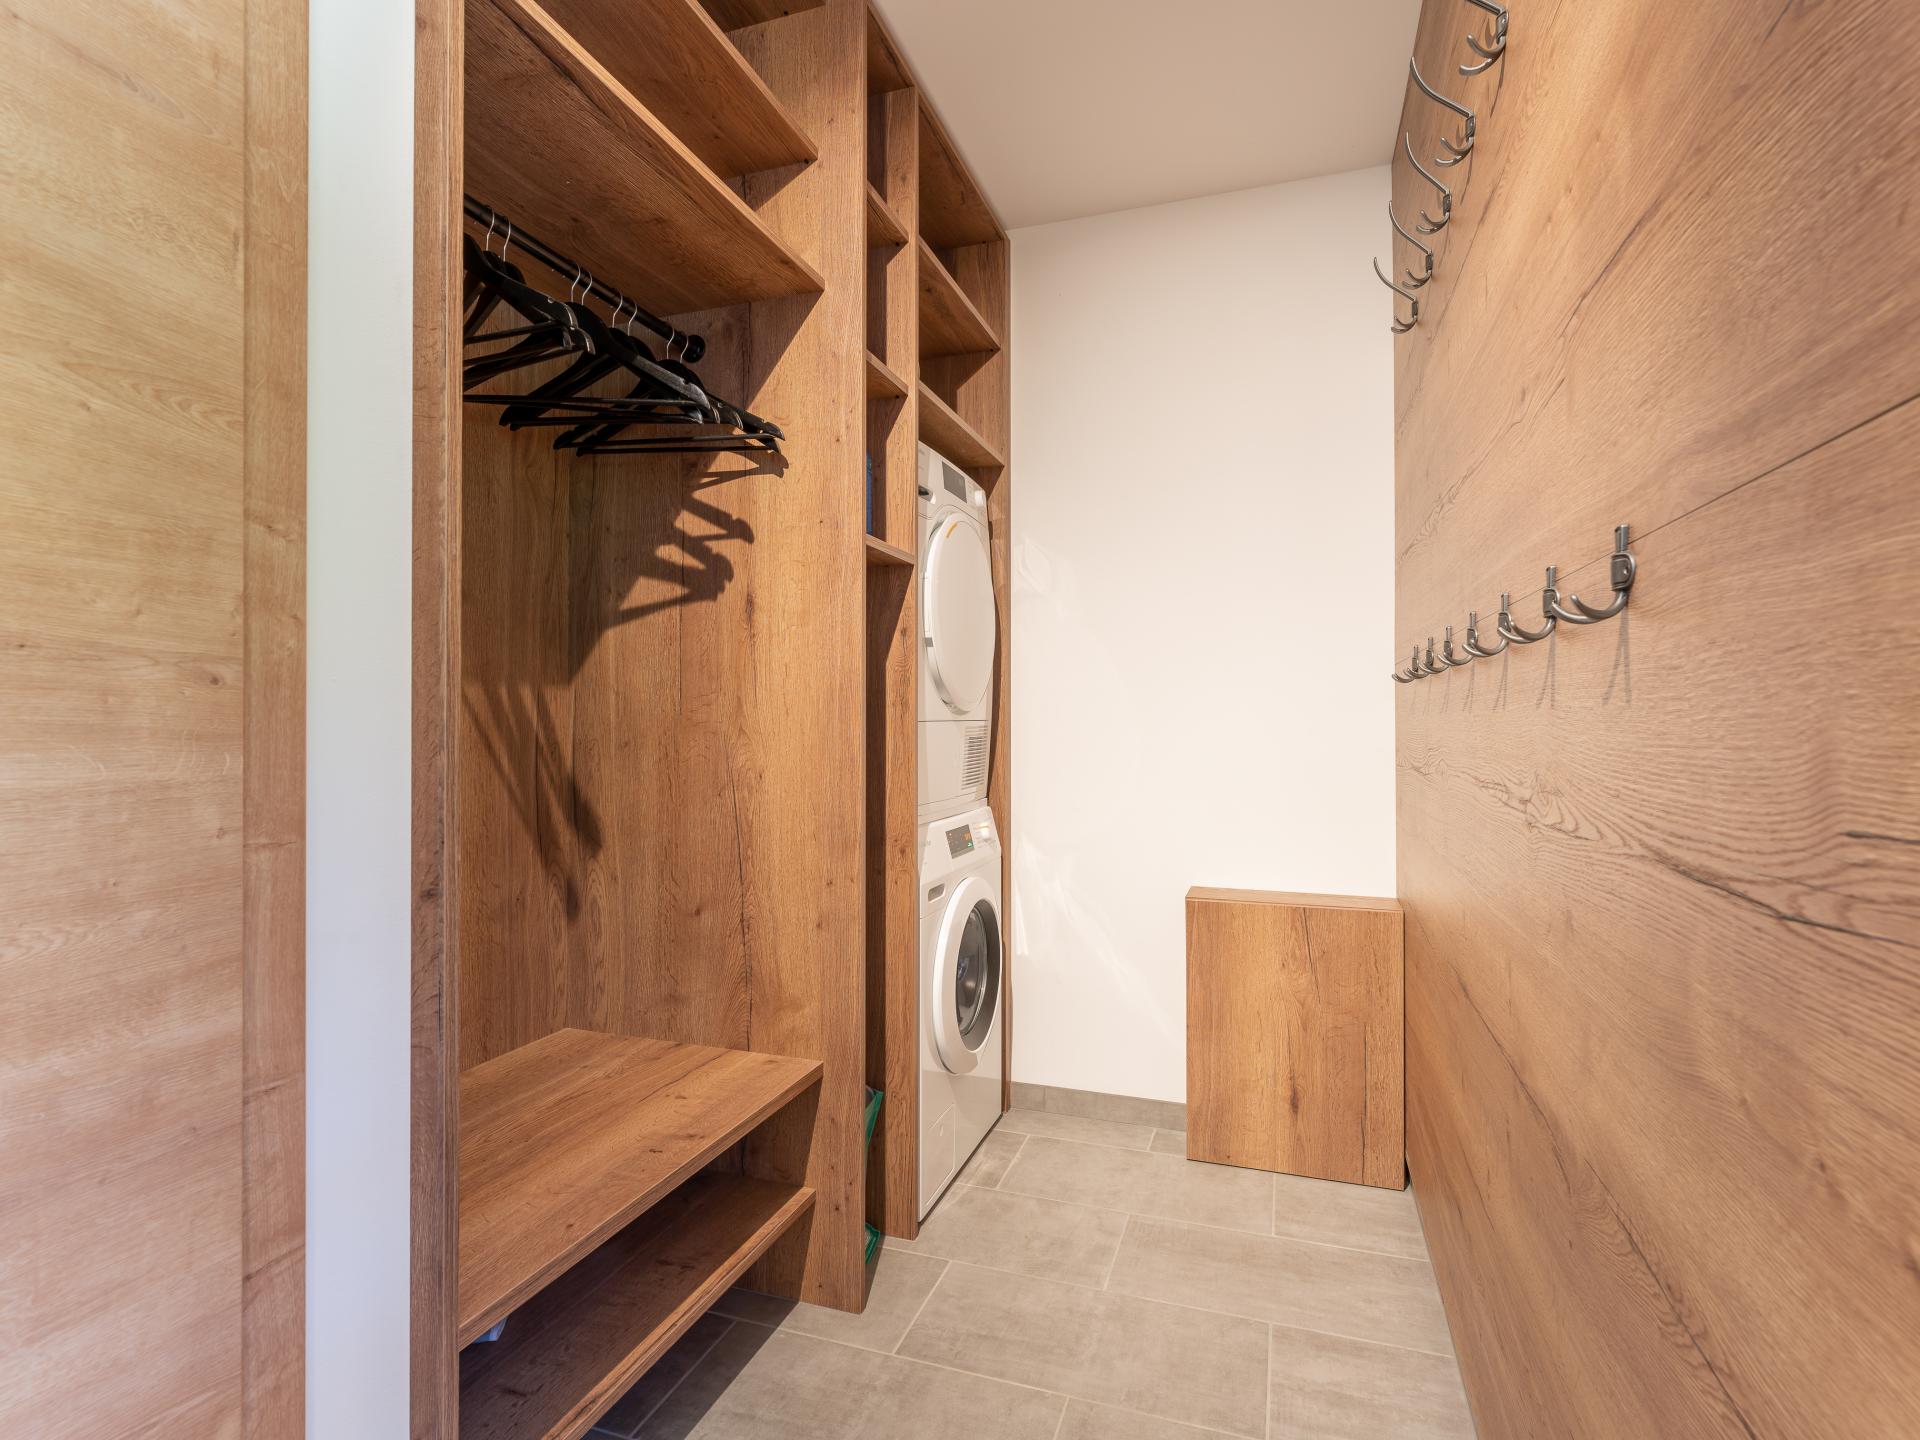 Practical overview of the storage room with cloakroom